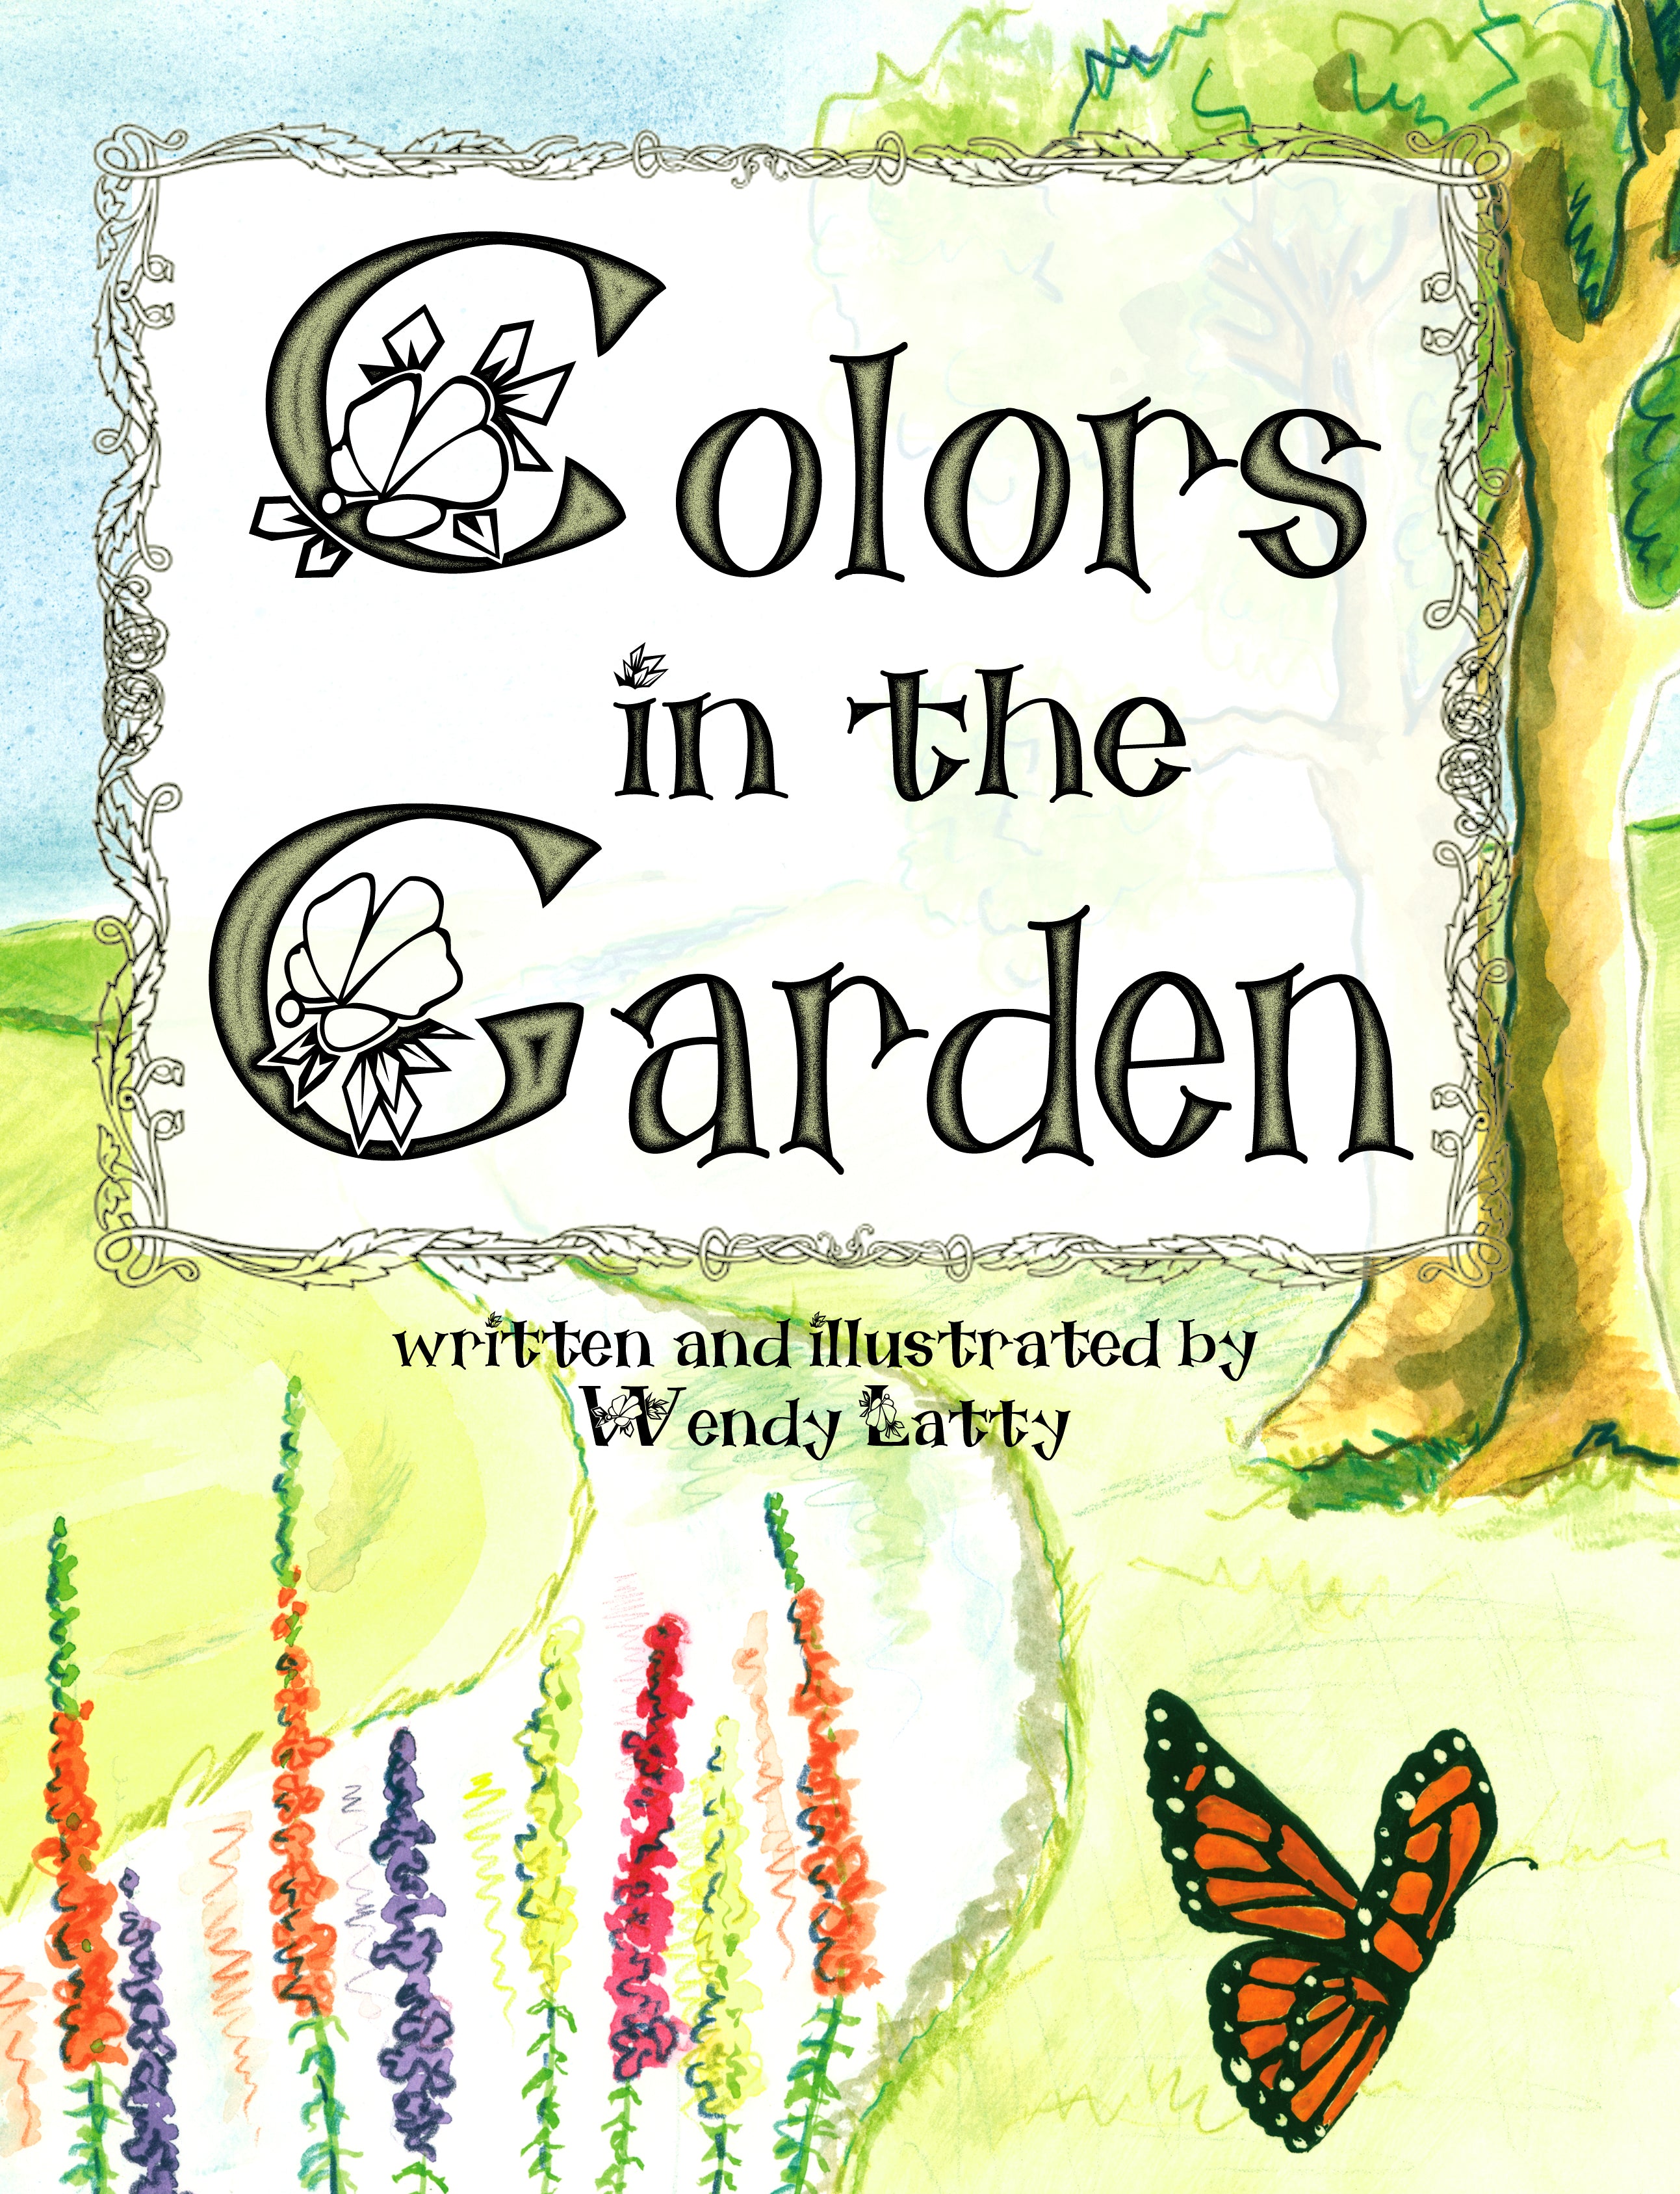 Wendy Latty’s “Colors in the Garden” is the Speckled Egg Press bestseller for June